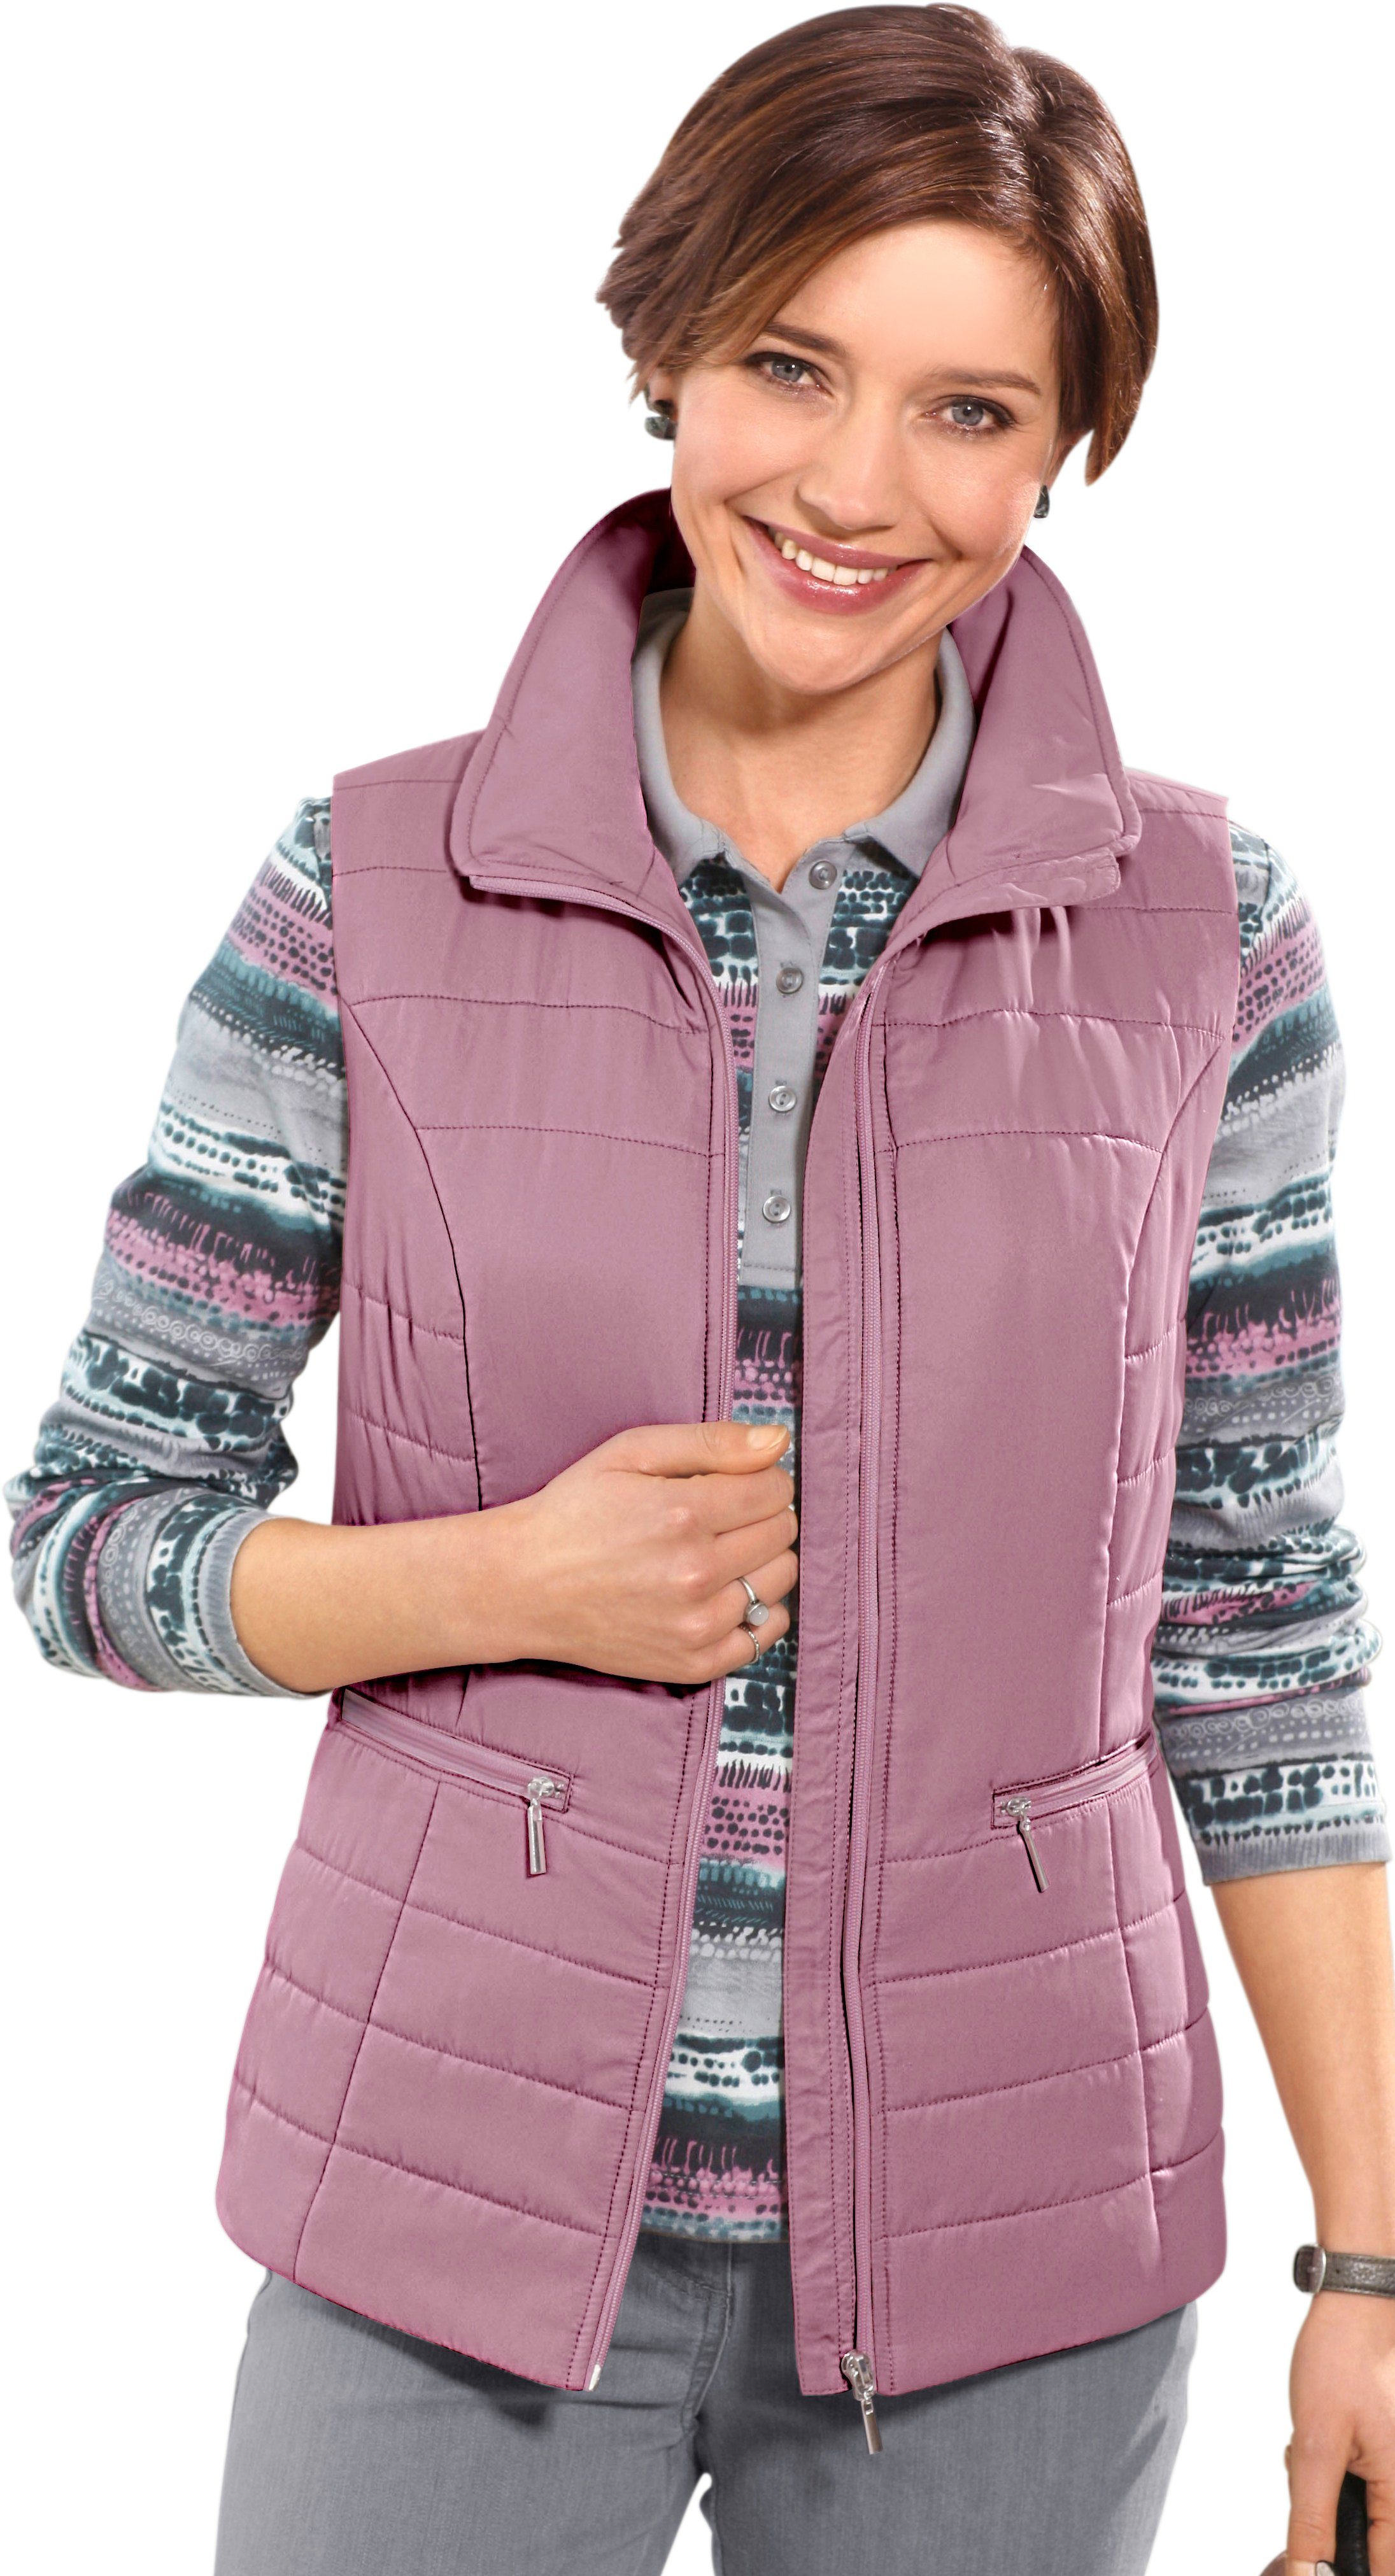 Otto - Collection L. NU 15% KORTING: Collection L. bodywarmer met platte kraag